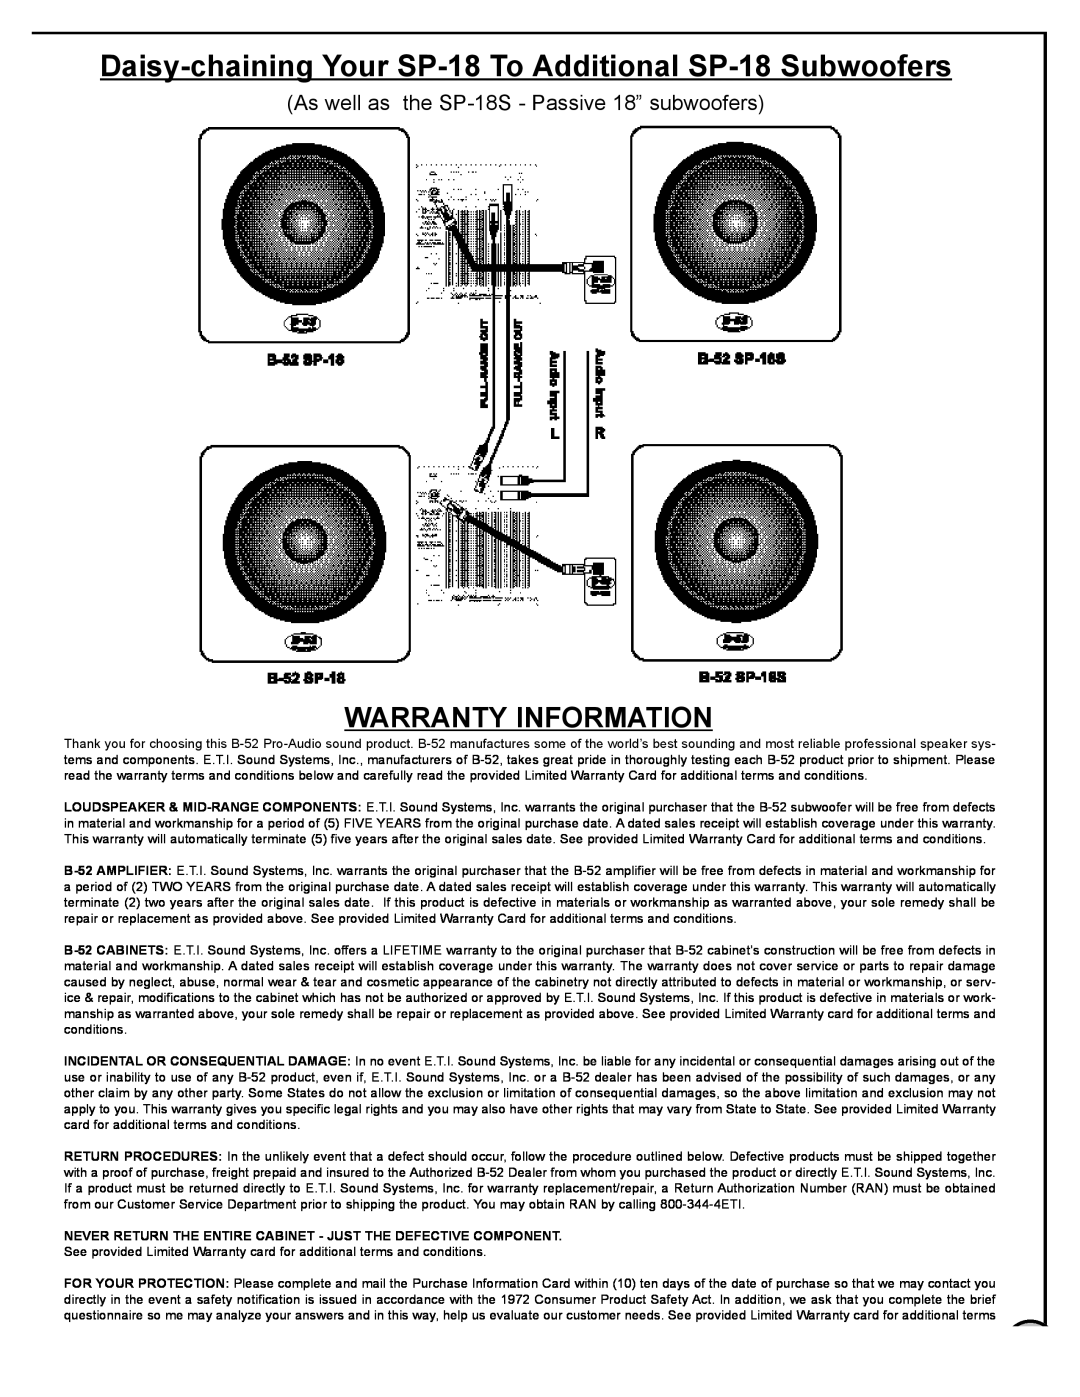 Audio Pro manual Warranty Information, As well as the SP-18S- Passive 18” subwoofers 